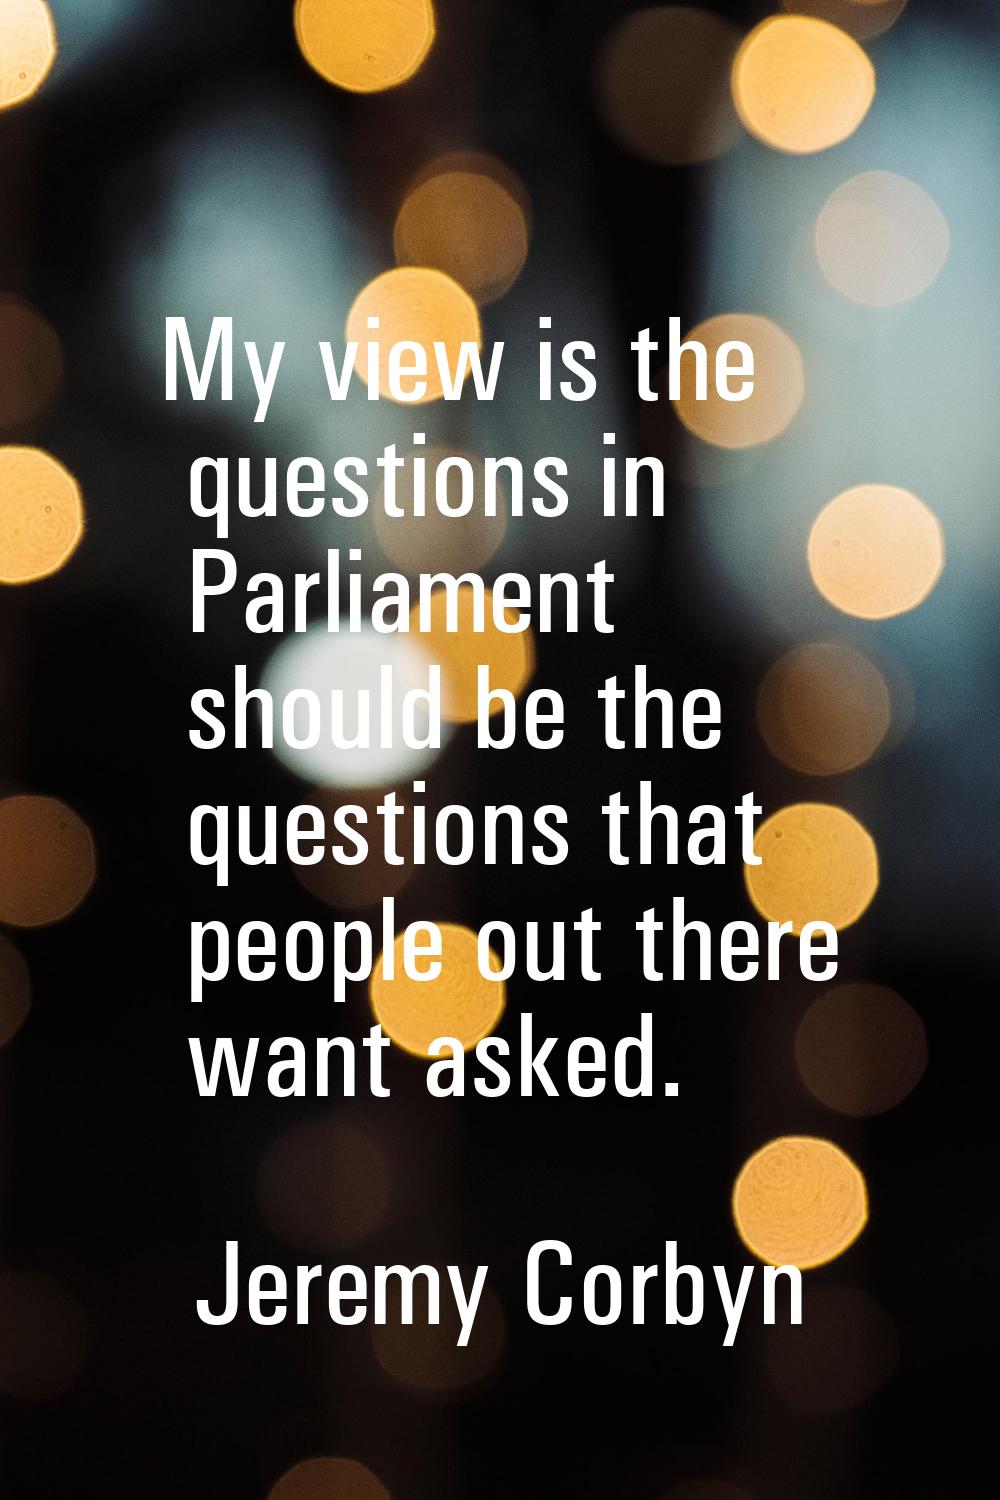 My view is the questions in Parliament should be the questions that people out there want asked.